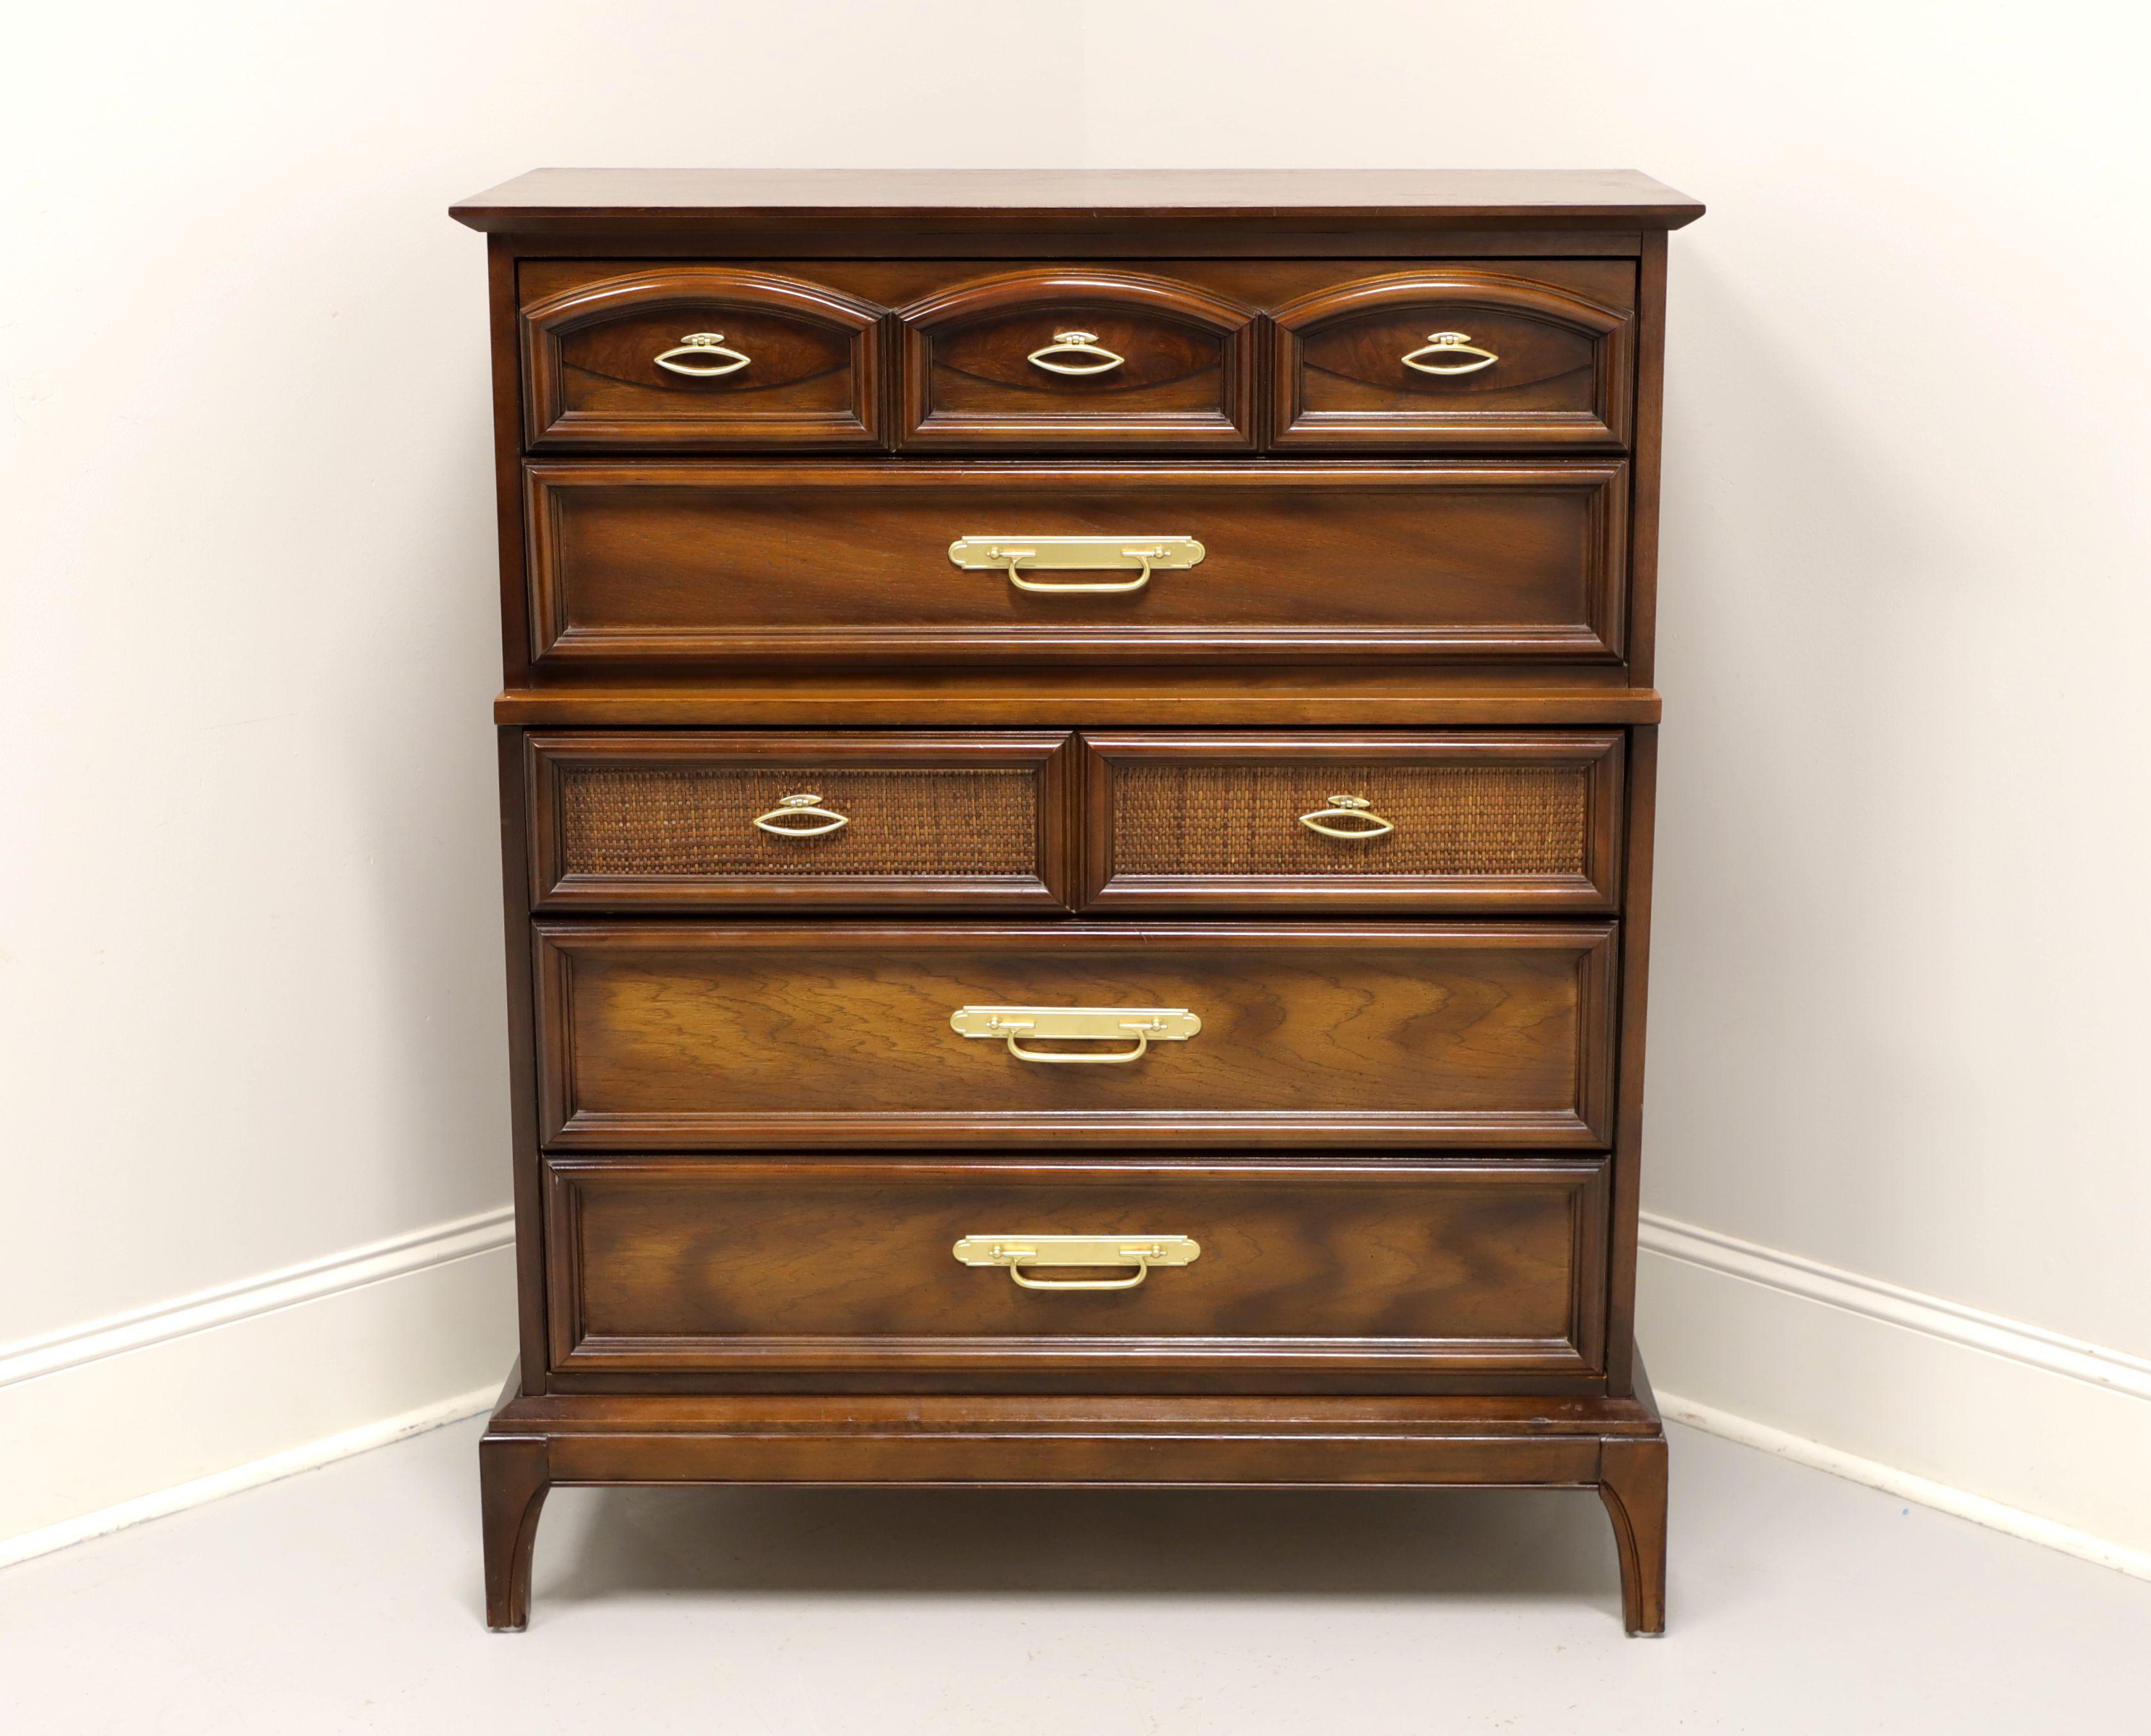 An Asian influenced Mid-Century chest of drawers, unbranded, similar quality to Thomasville. Walnut with brass hardware, burl accent to top drawer, rattan acccent to middle drawer, and splayed feet. Features five drawers of dovetail construction.